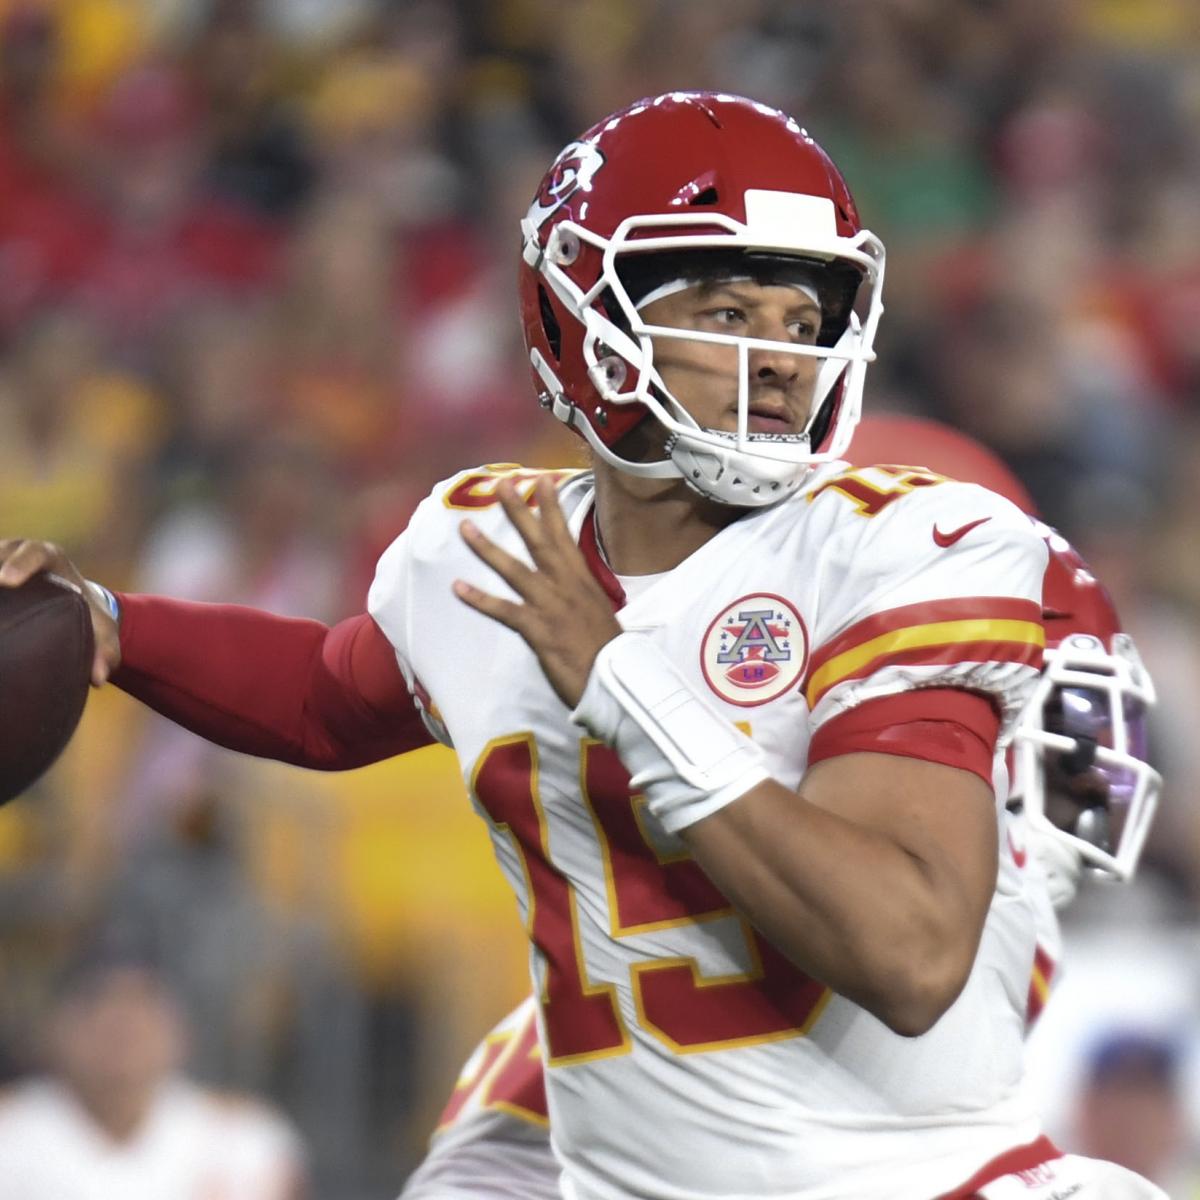 Fantasy Football 2019: Top Team Names, PPR Rankings and Dynasty Advice